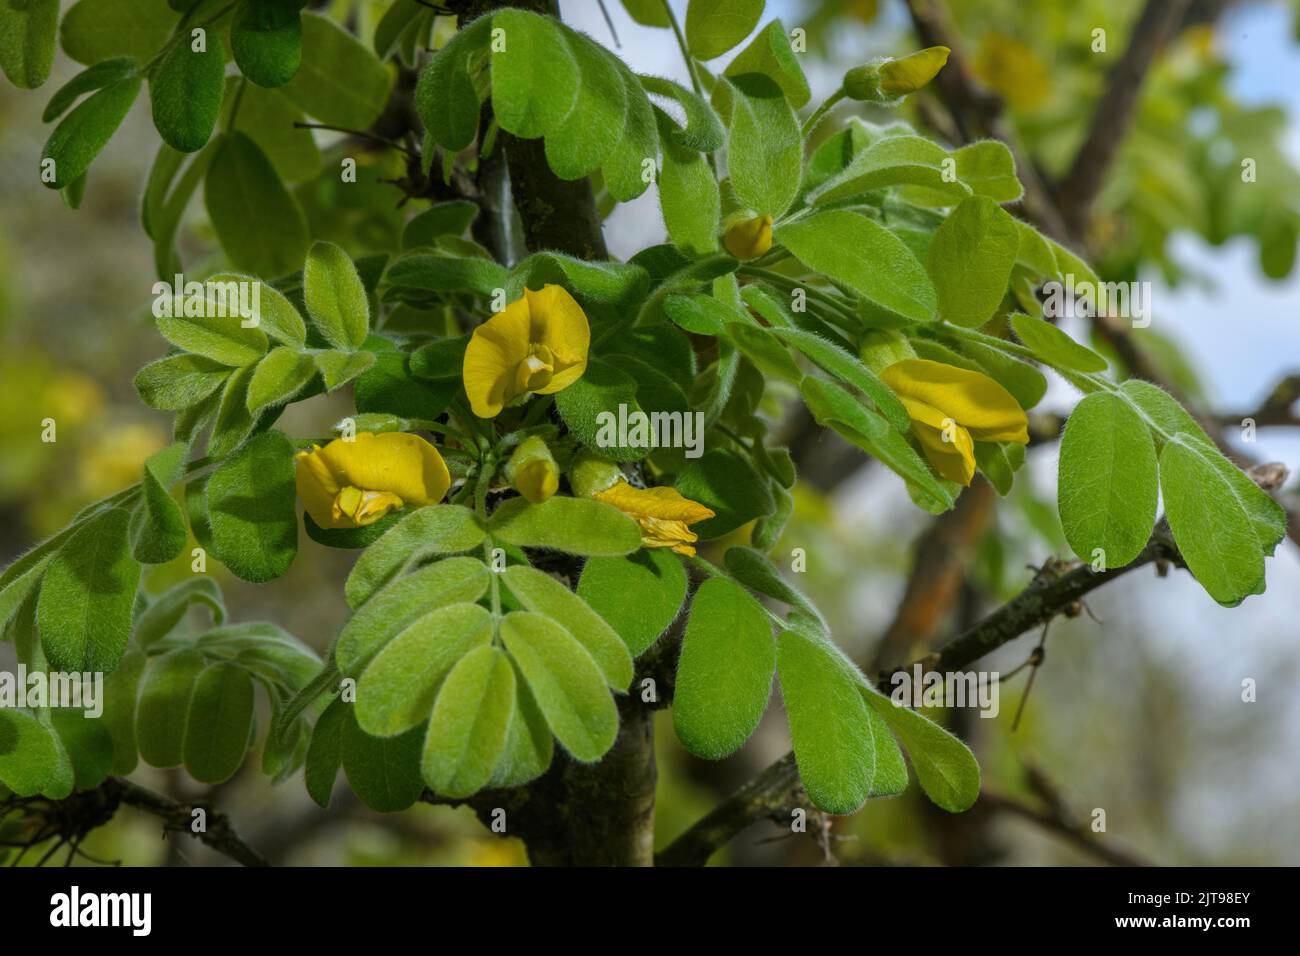 Siberian pea-tree, Caragana arborescens, in flower. From north-east Asia. Stock Photo